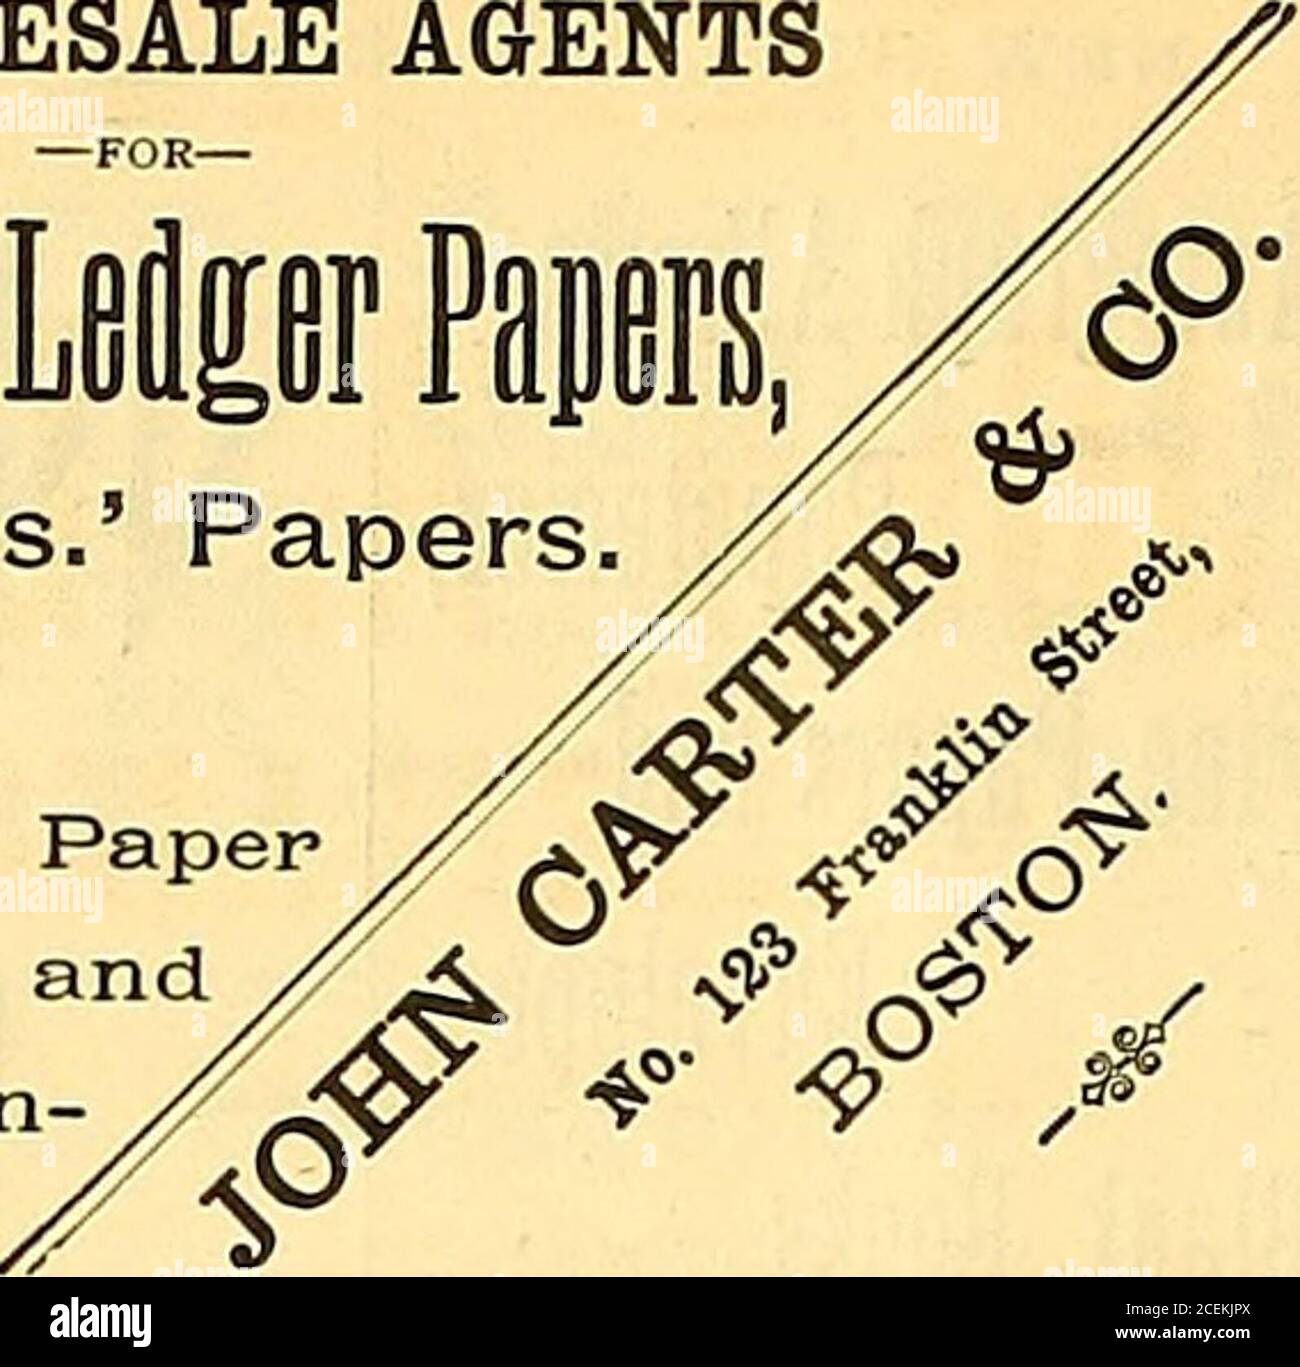 . The American stationer. WHOLESALE AGENTS Bfm Westis rane Jr. & Bros —ALSO DEALERS IN- Book and Ne-wsPapers, Cardsa and Merchan. ■ ^©■ujn.d.ed. l.TSO. SPALDING & HODGE, PAPER MAKERS — AND — Wholesale and Export Stationers, Horton Kirby Mills,South Darcuth, ■ KENT,  1145, 146 «c 147 Drury Lane,■ LONDON. KEEP IN STOCK AND MAKE TO OEDER NEWS, WRITING, PRINTINGS, DRAWING, TISSUE p ^ P ^ J^ g^^Q*^^^^^ White, Cream or any Colored Papers, in Every Qnality. LOAN AND BANK PAPERS, HAND OR MACHINE MADE. {S¥ SPALDING & HODGE holding the Largest Stock in or out of London, customerscan depend on their or Stock Photo